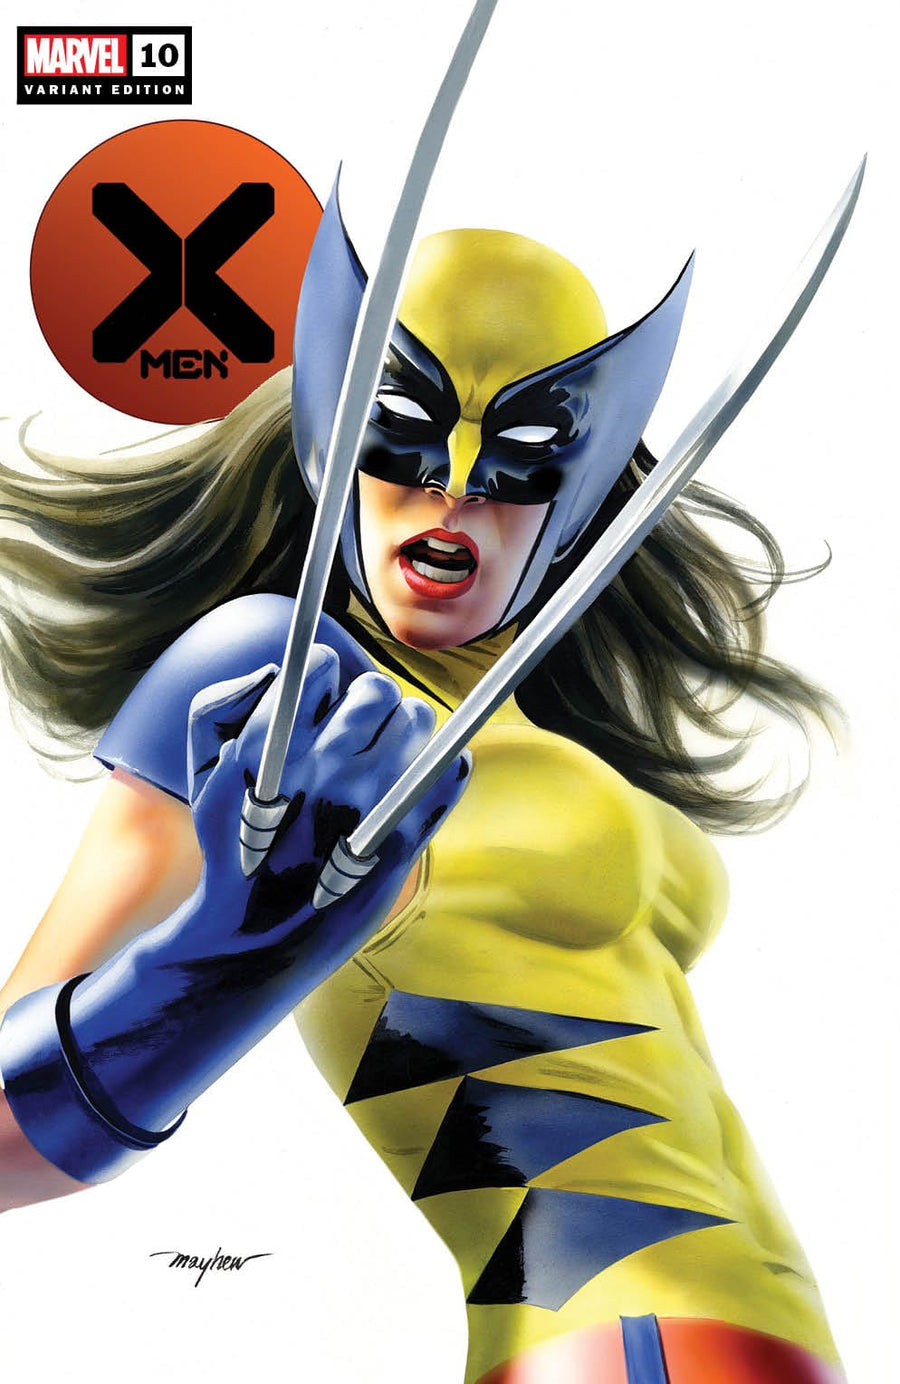 SINS OF SINISTER #1 Mike Mayhew Studio Variant Cover Trade Dress Raw Bundle with X-MEN #1 and X-MEN #10